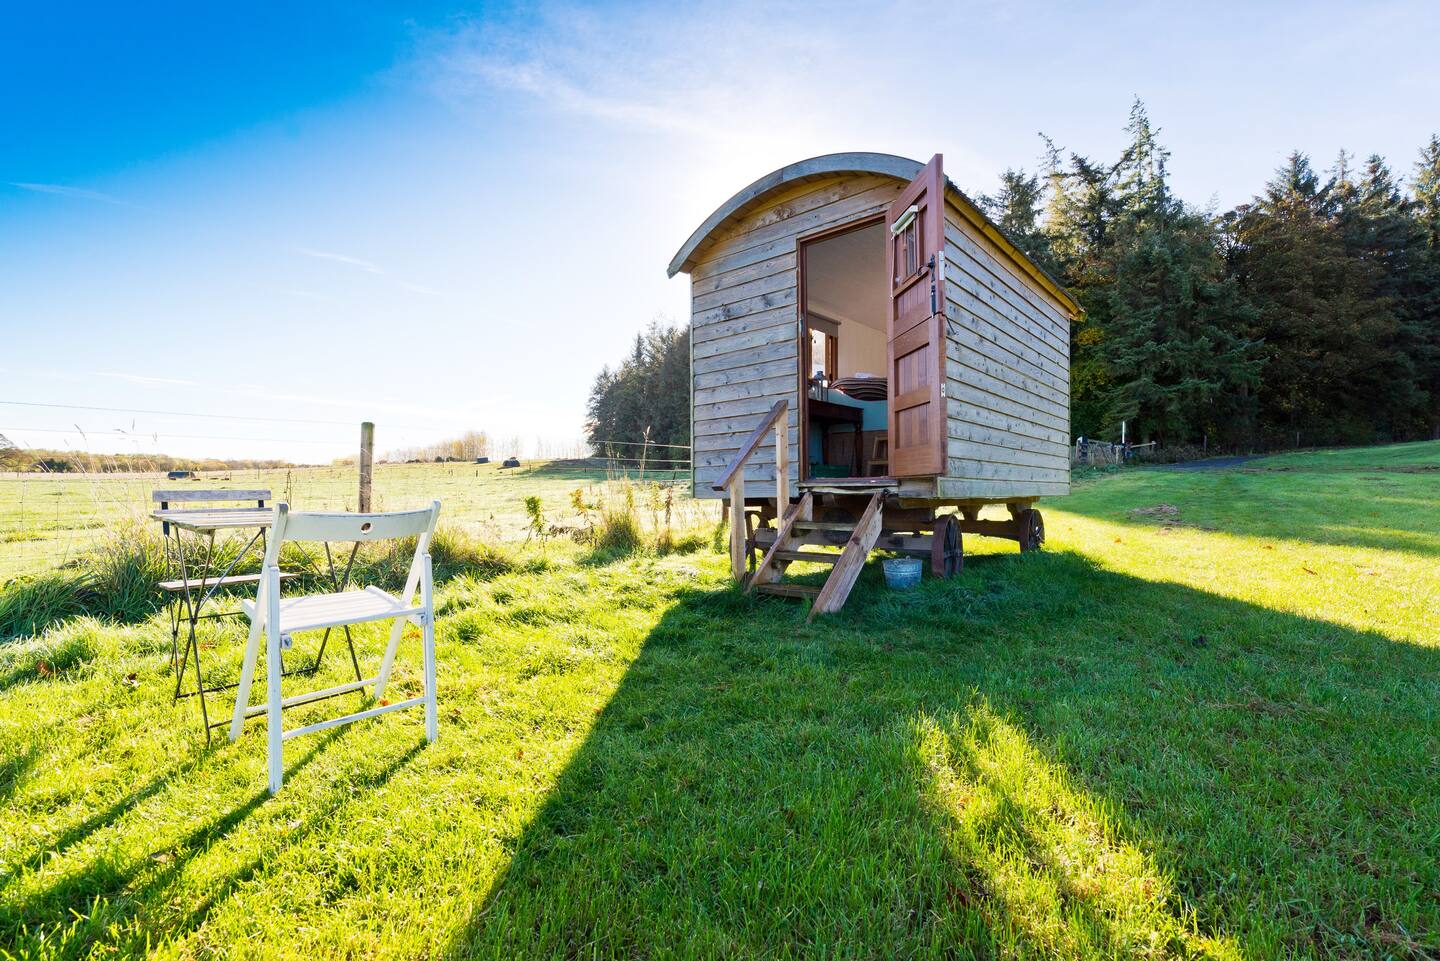 This shepherd's hut is a great glamping experience!